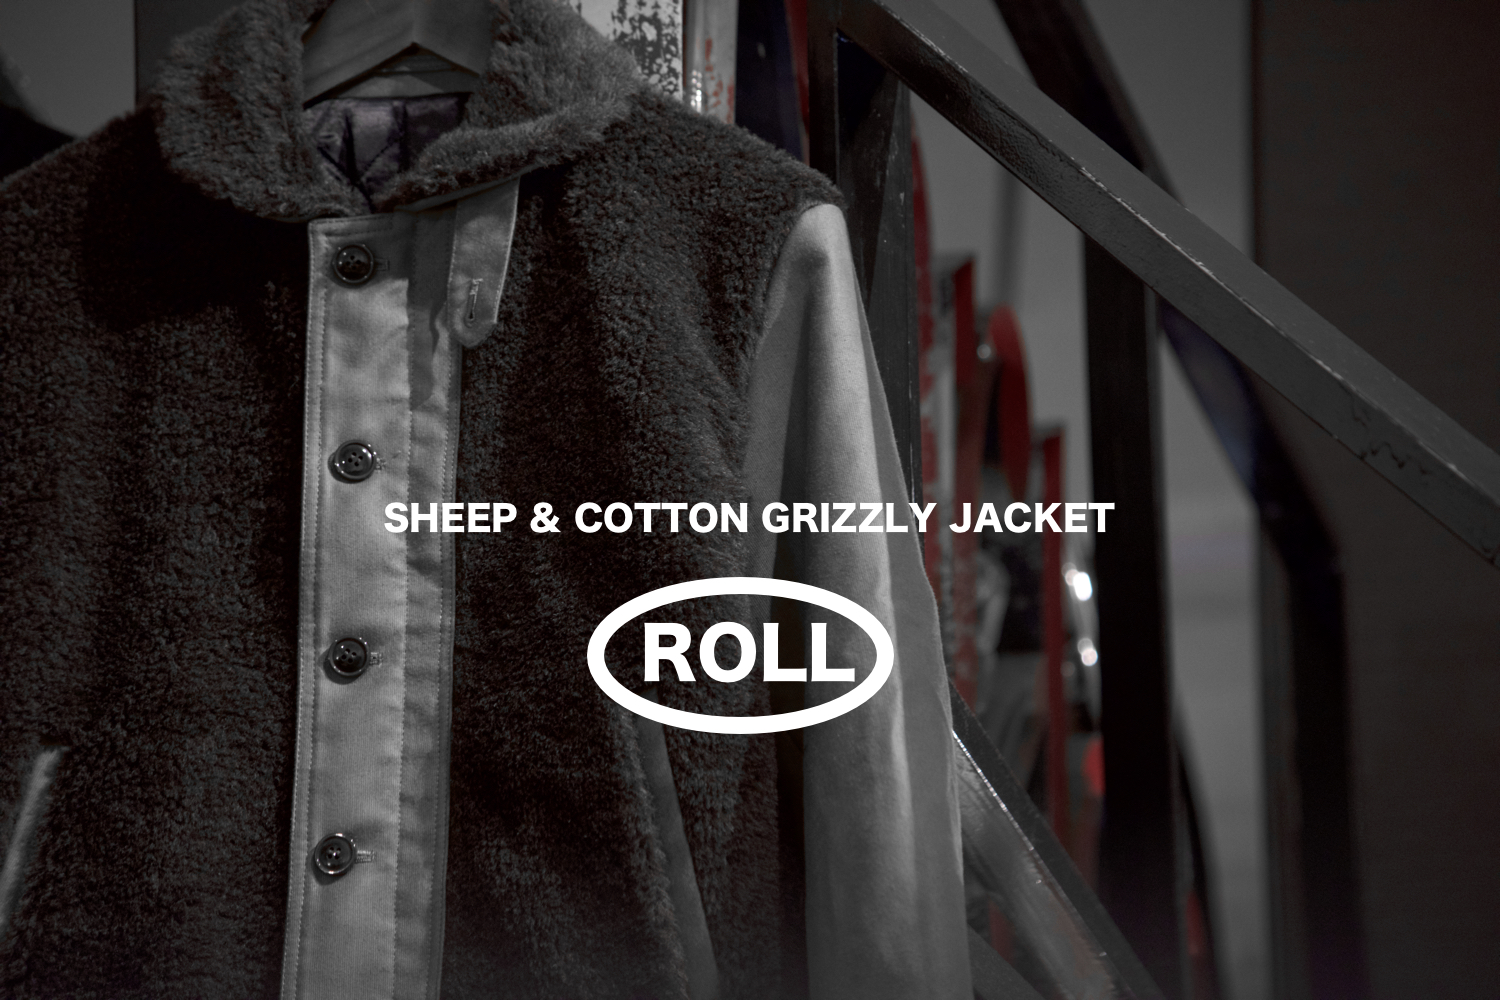 GRIZZLY JACKET